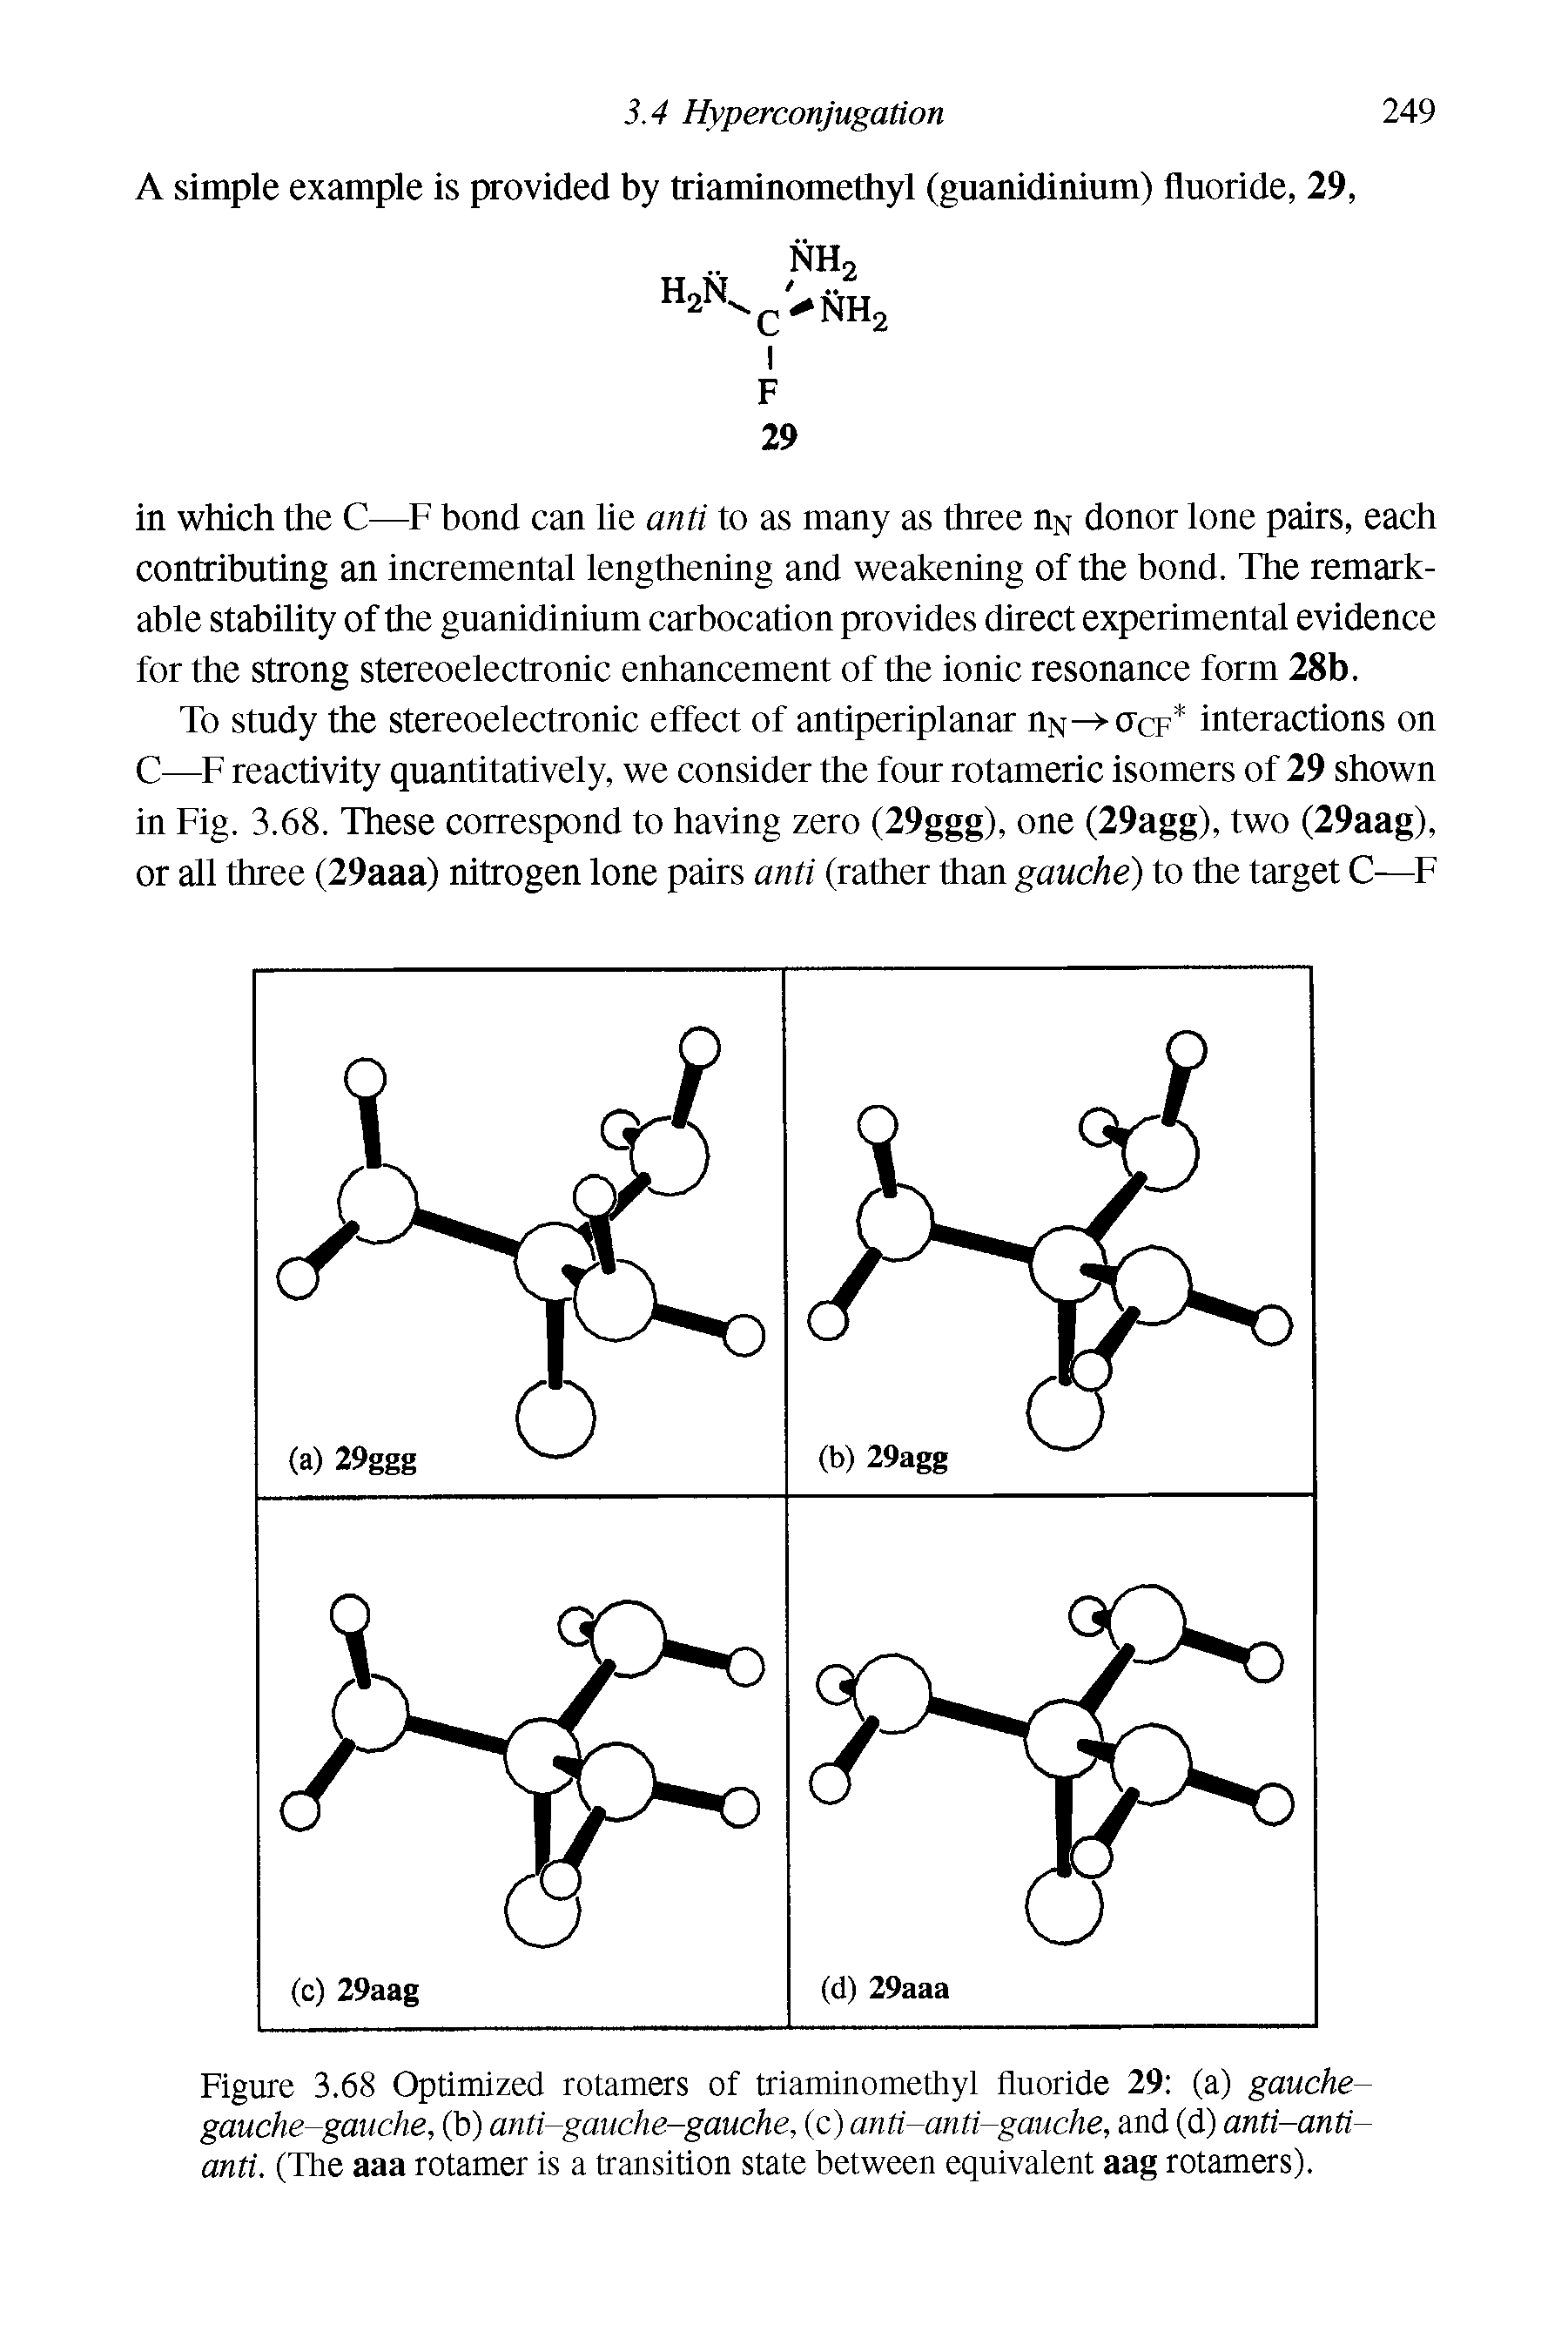 Figure 3.68 Optimized rotamers of triaminomethyl fluoride 29 (a) gauche gauche-gauche, (b) anti-gauche-gauche, (c) anti-anti-gauche, and (d) anti-anti anti. (The aaa rotamer is a transition state between equivalent aag rotamers).